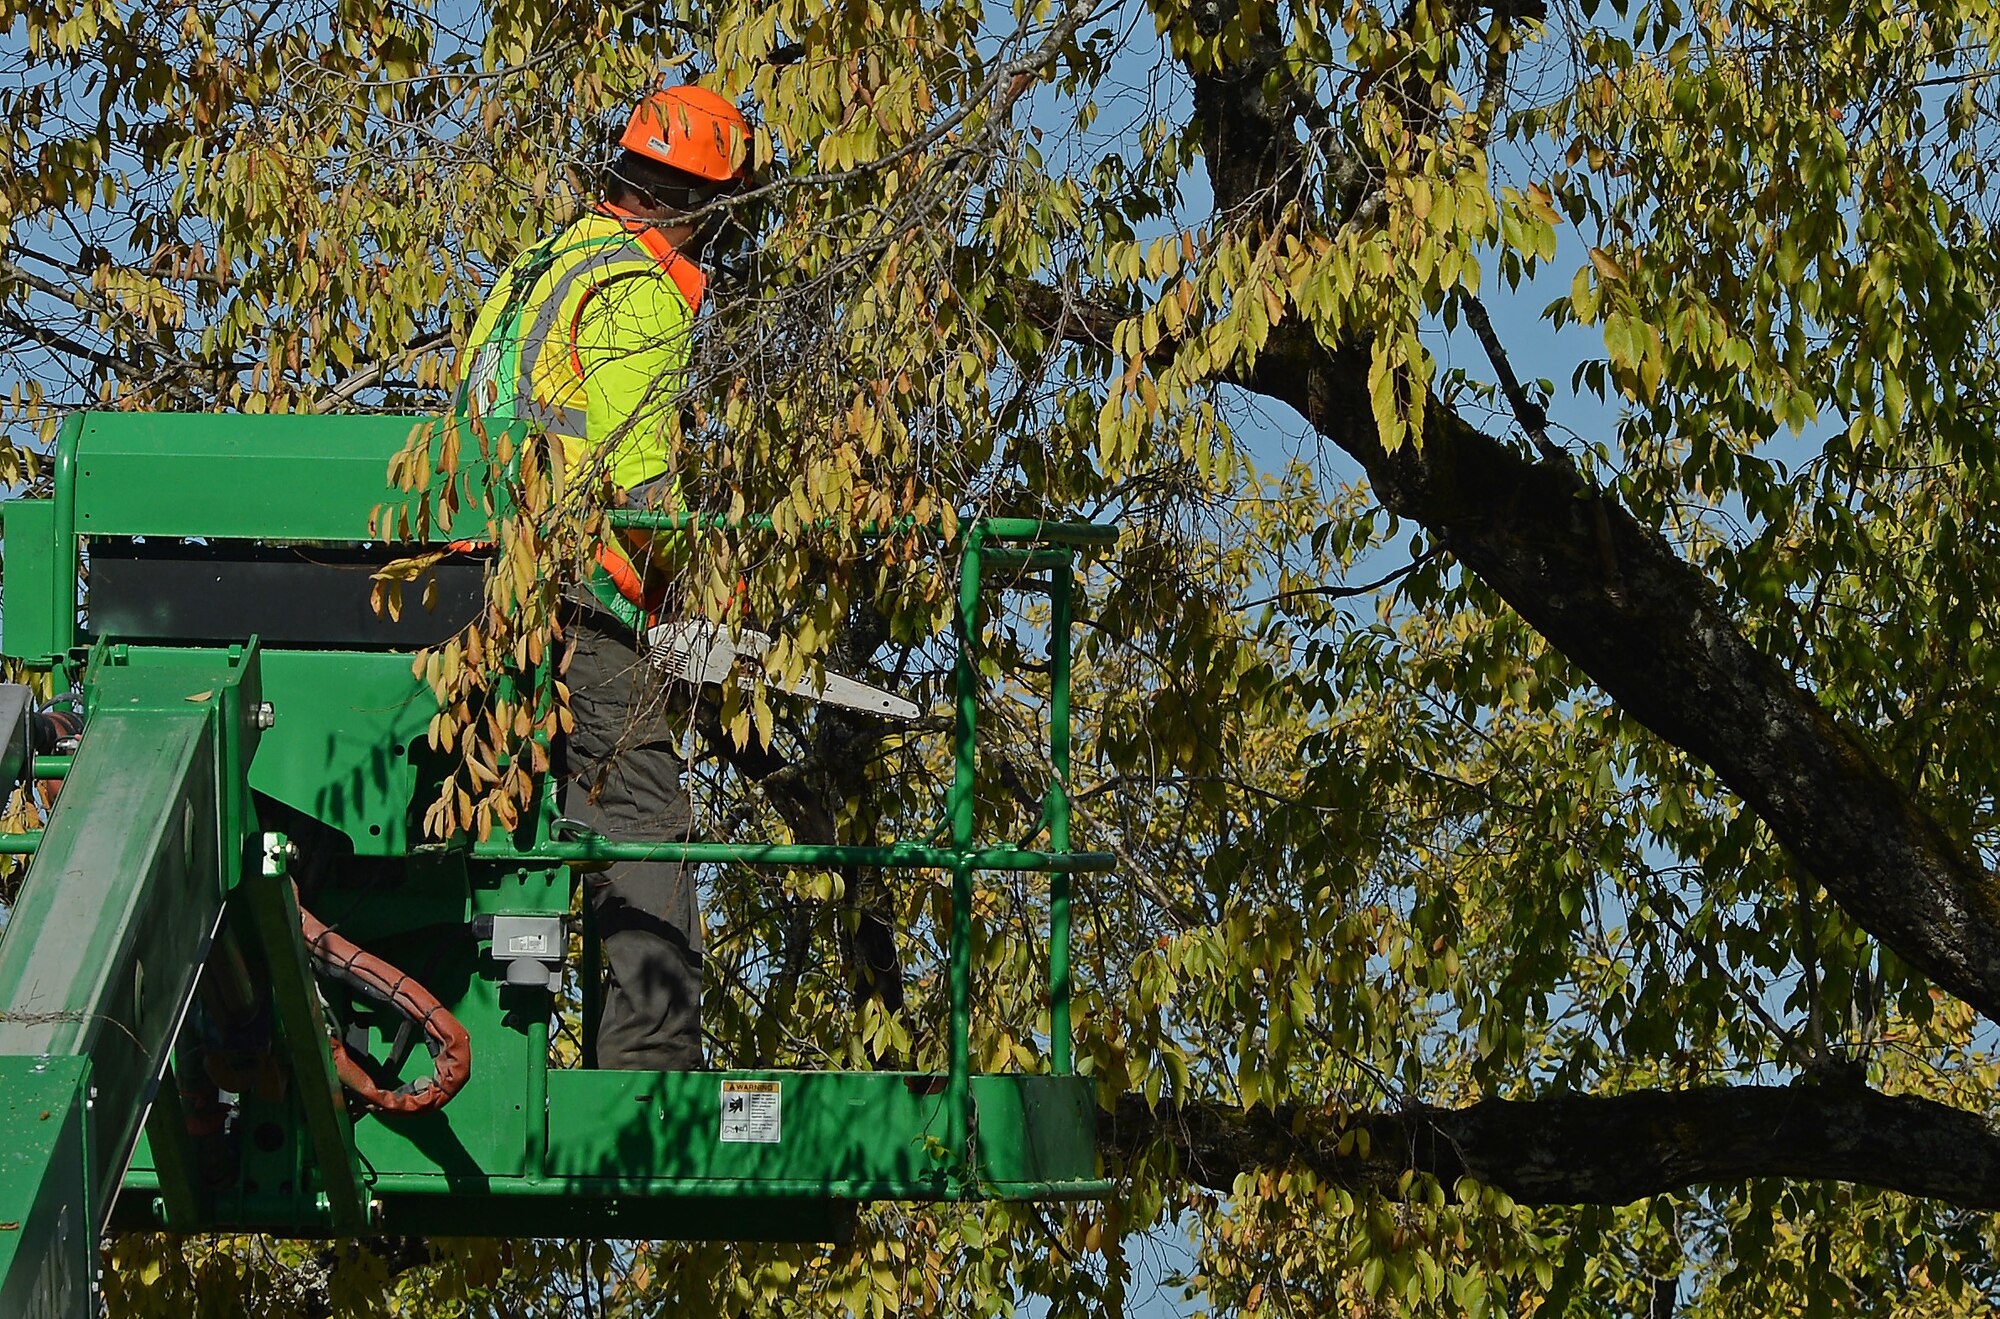 A member of Directorate of Public Works prune trees during a Historical Reset project Oct. 12, 2018 on McChord Field, Joint Base Lewis McChord, Wash.